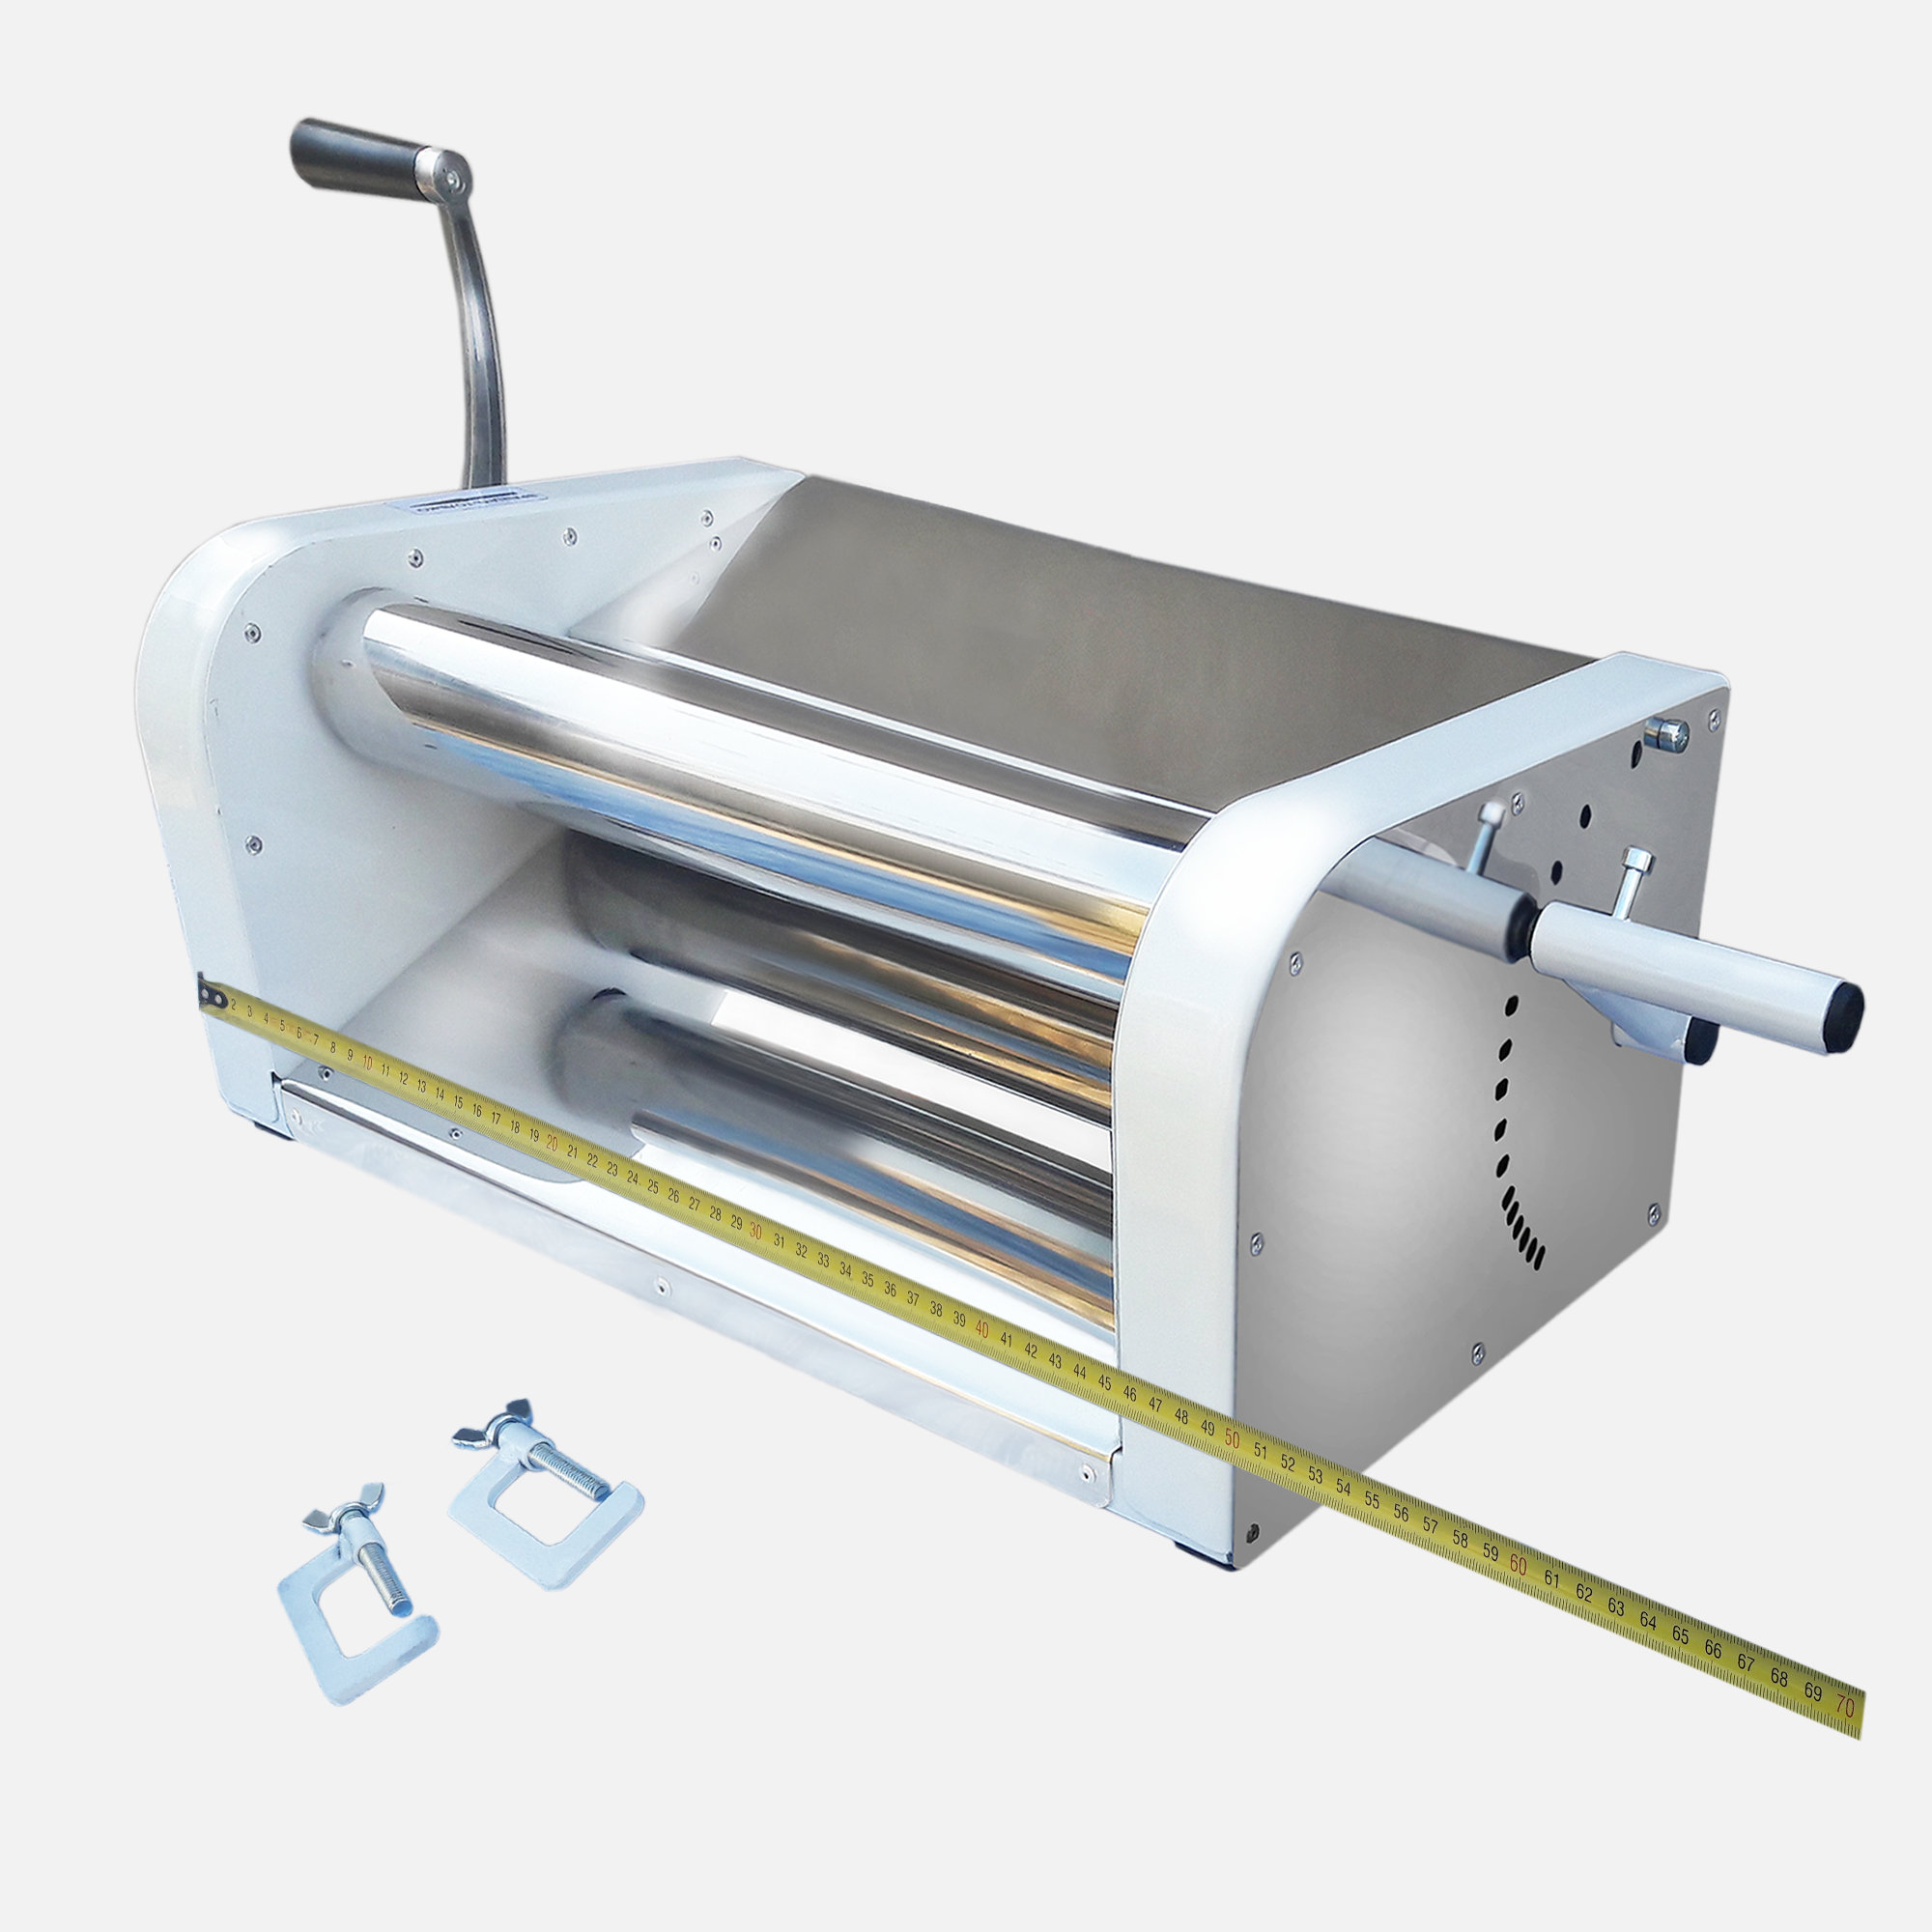 Chef Prosentials Manual 15 Inch Dough Roller Machine For Fondant, Sugar  Paste Or Croissant Making,0.5-15Mm Thick